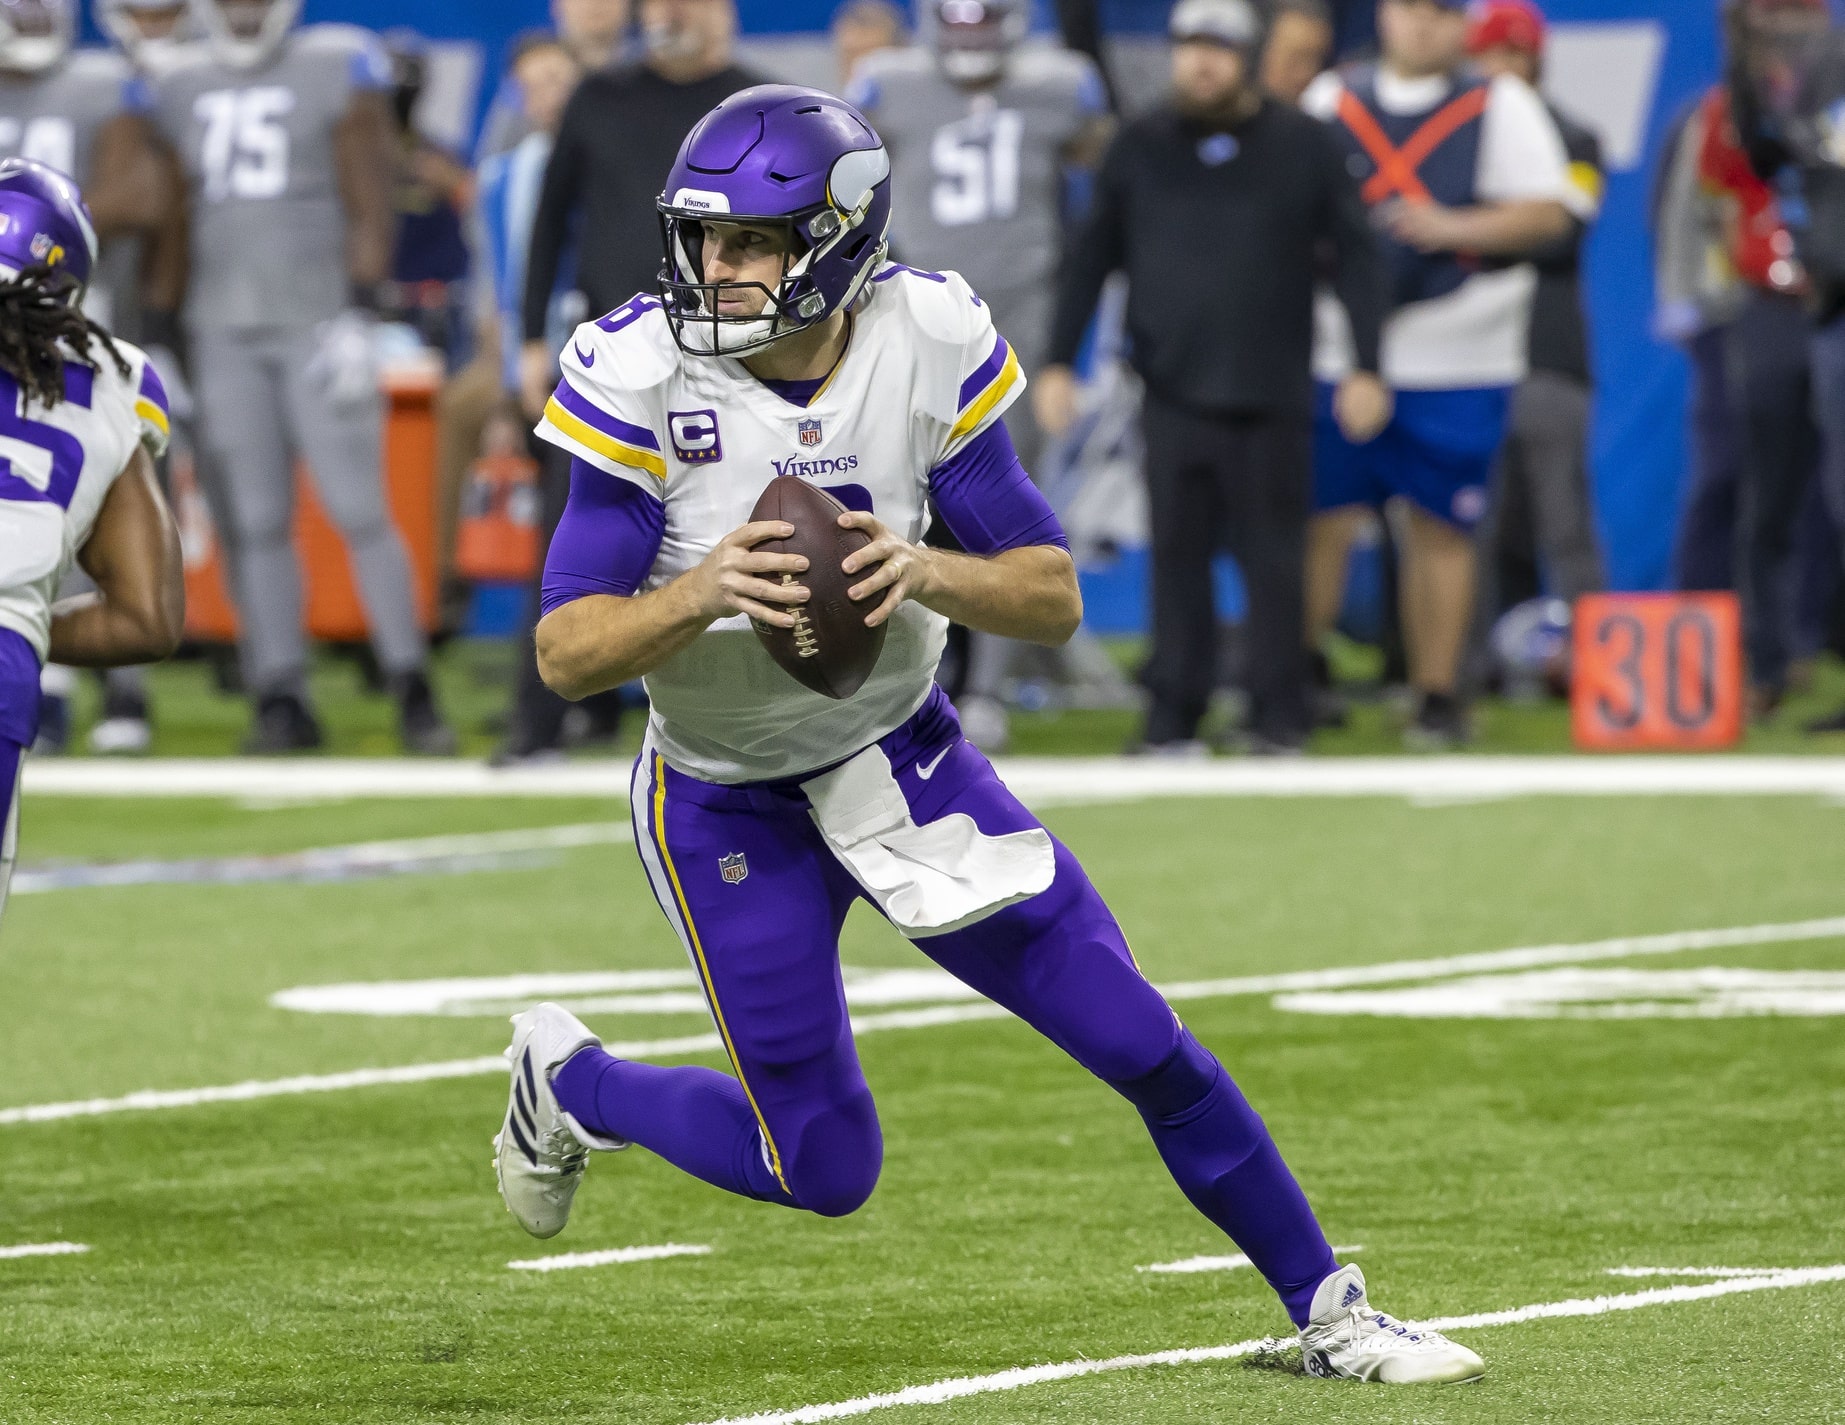 Minnesota Vikings quarterback Kirk Cousins (8) scrambles out of the pocket against the Detroit Lions in the first half at Ford Field.